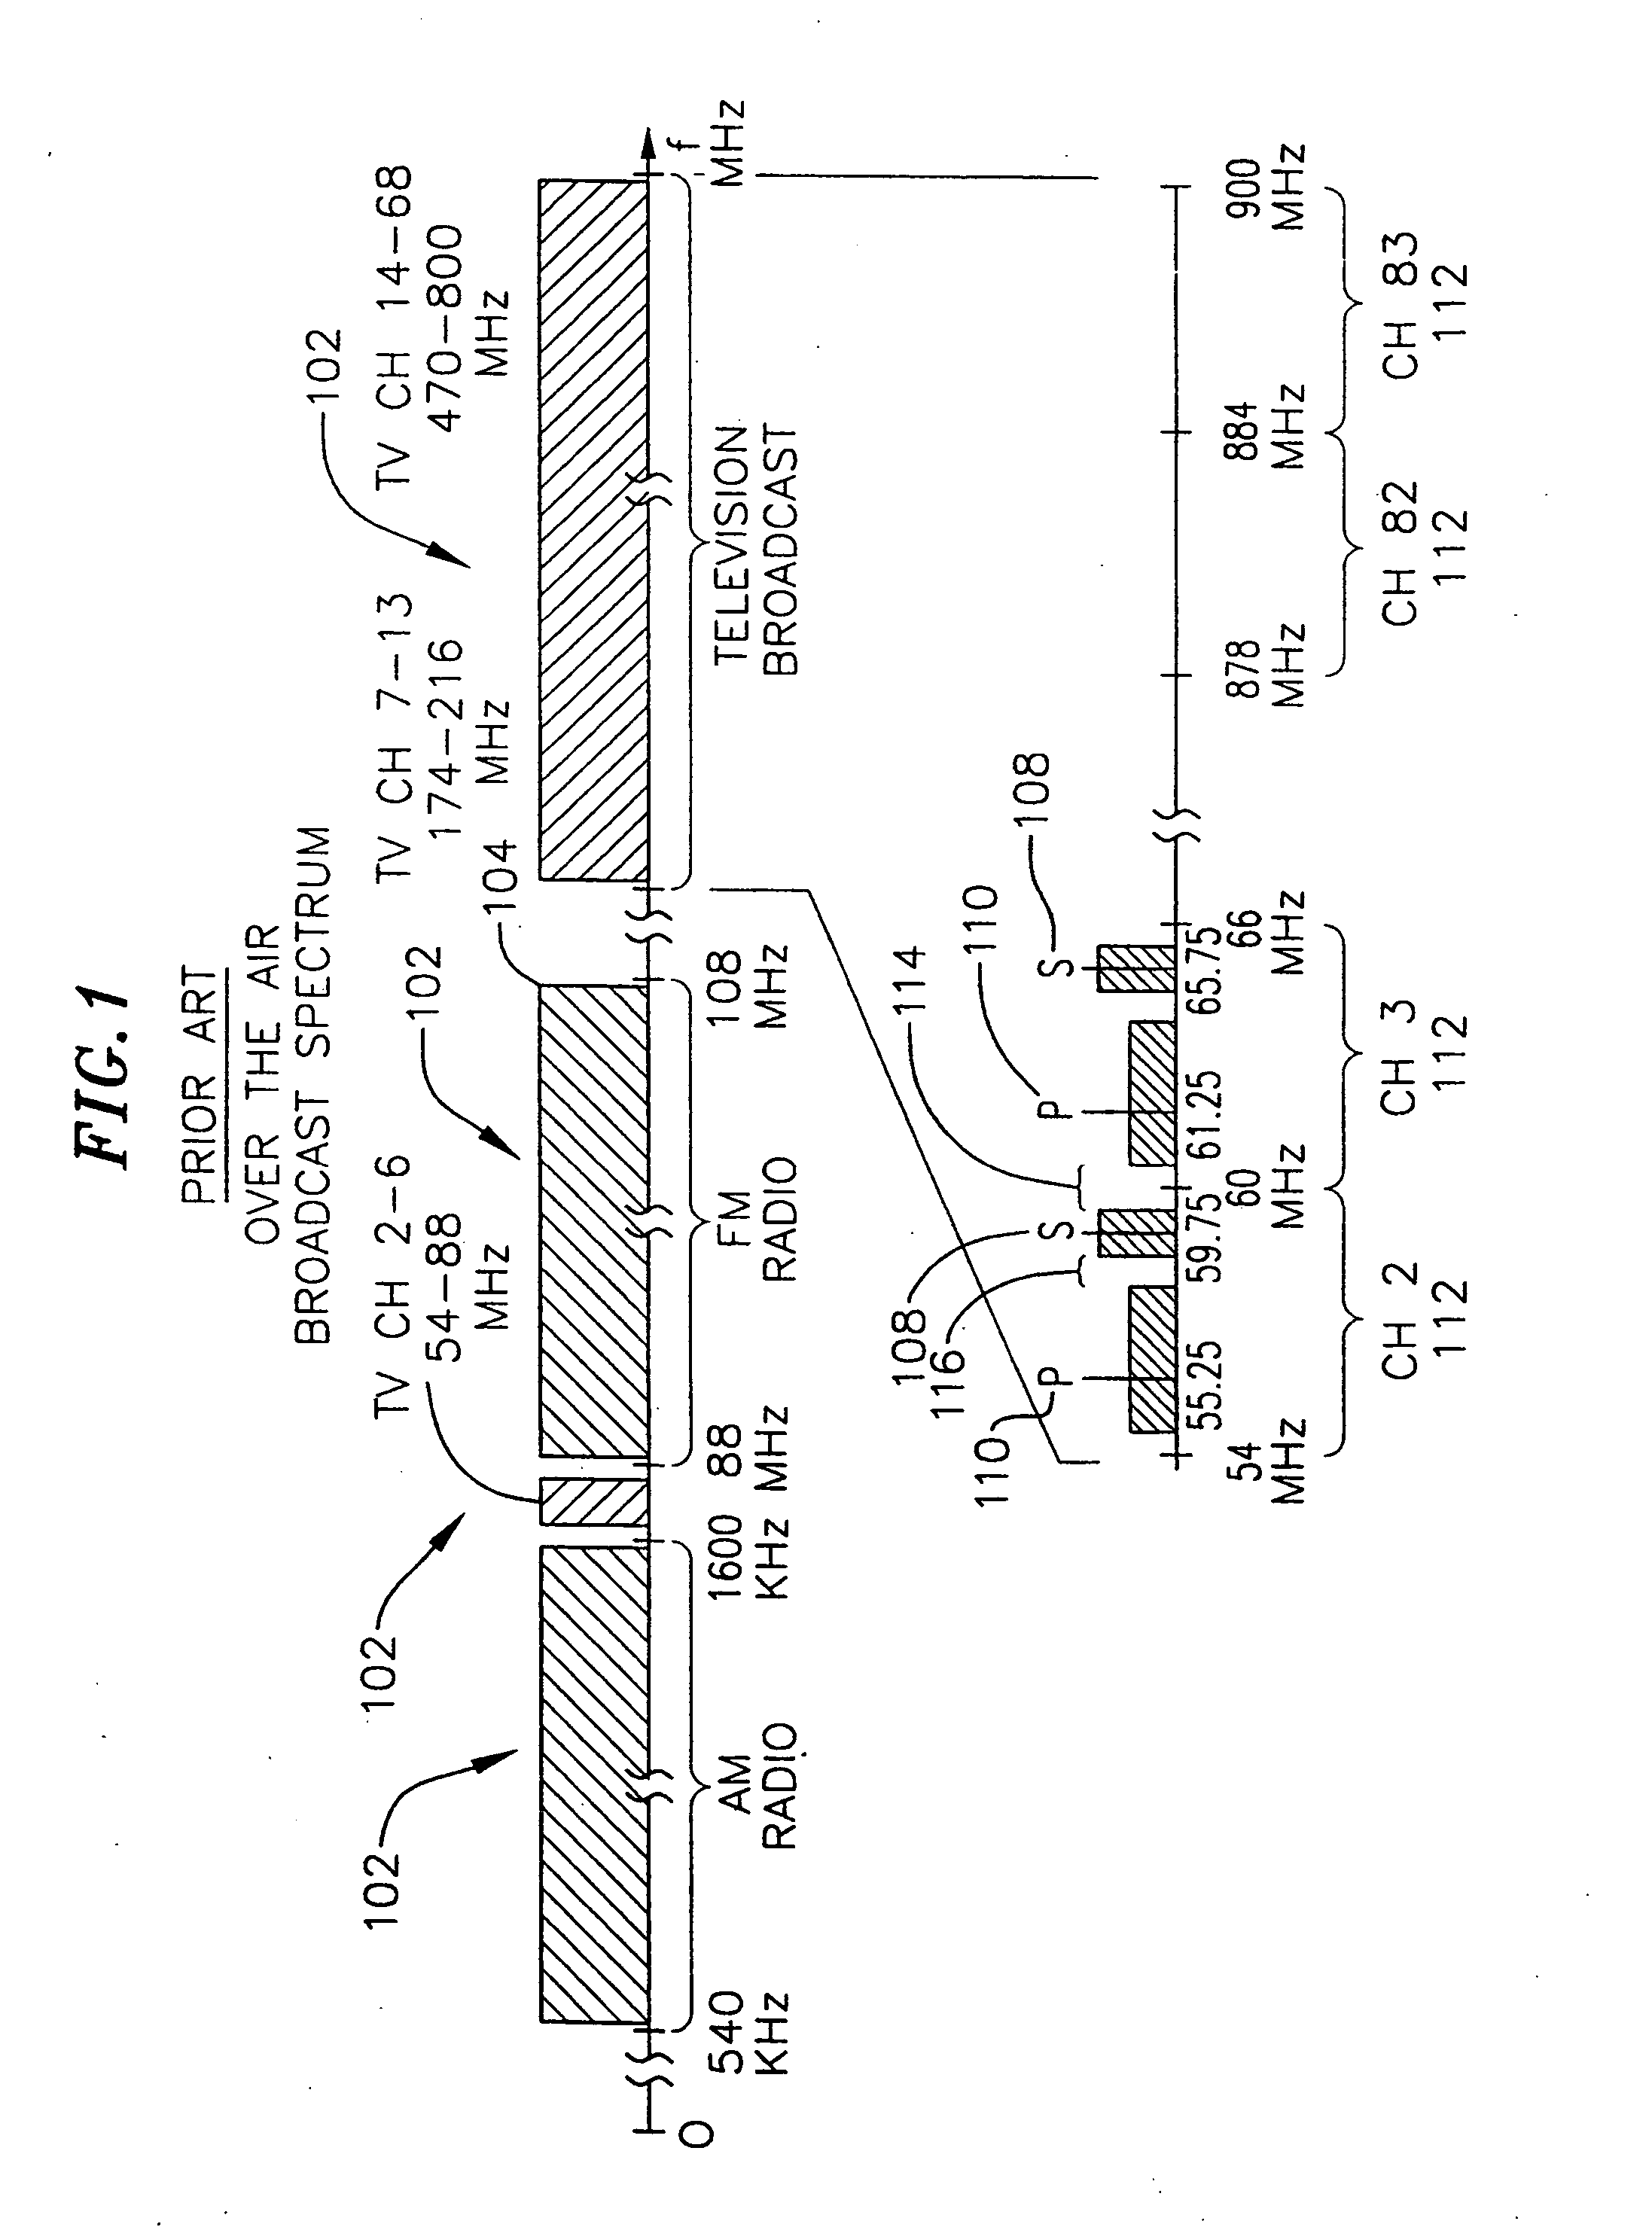 Integrated spiral inductor